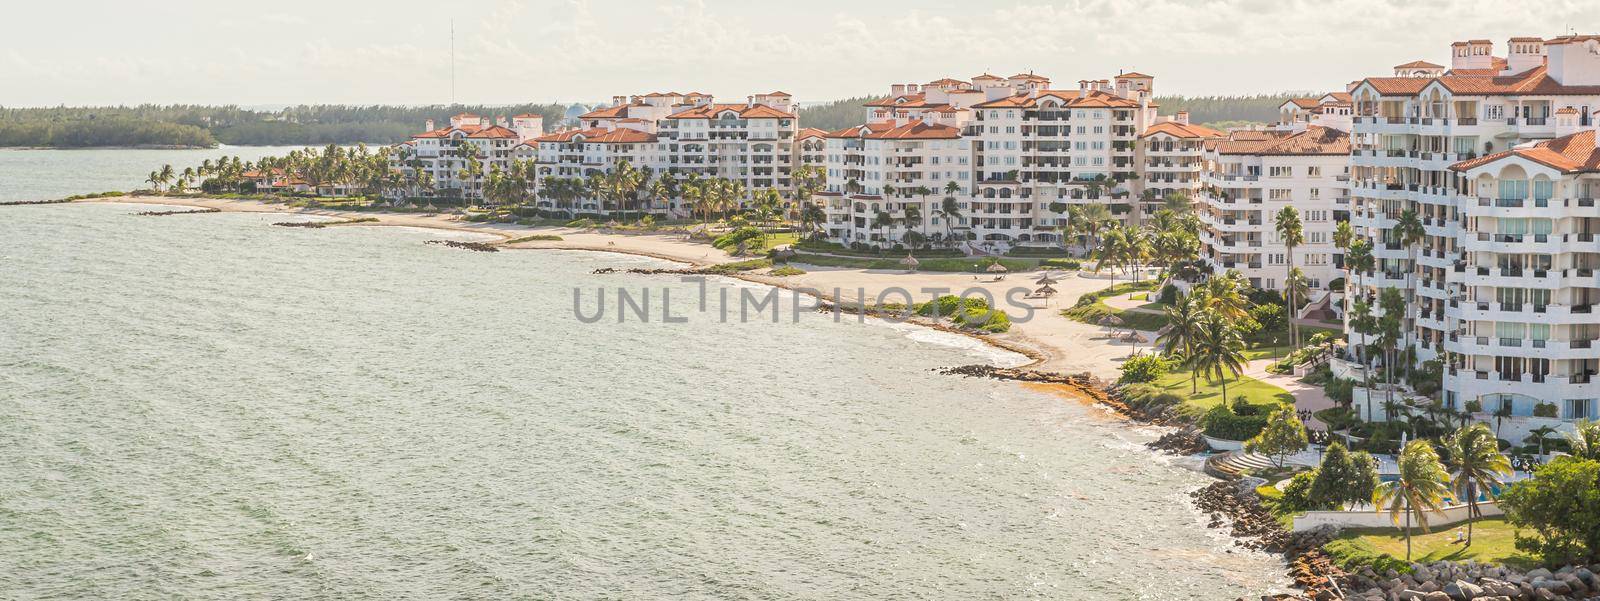 MIAMI, USA - SEPTEMBER 06, 2014 : Aerial drone view of apartments in Fisher Island on September 06, 2014 in Miami. by Mariakray